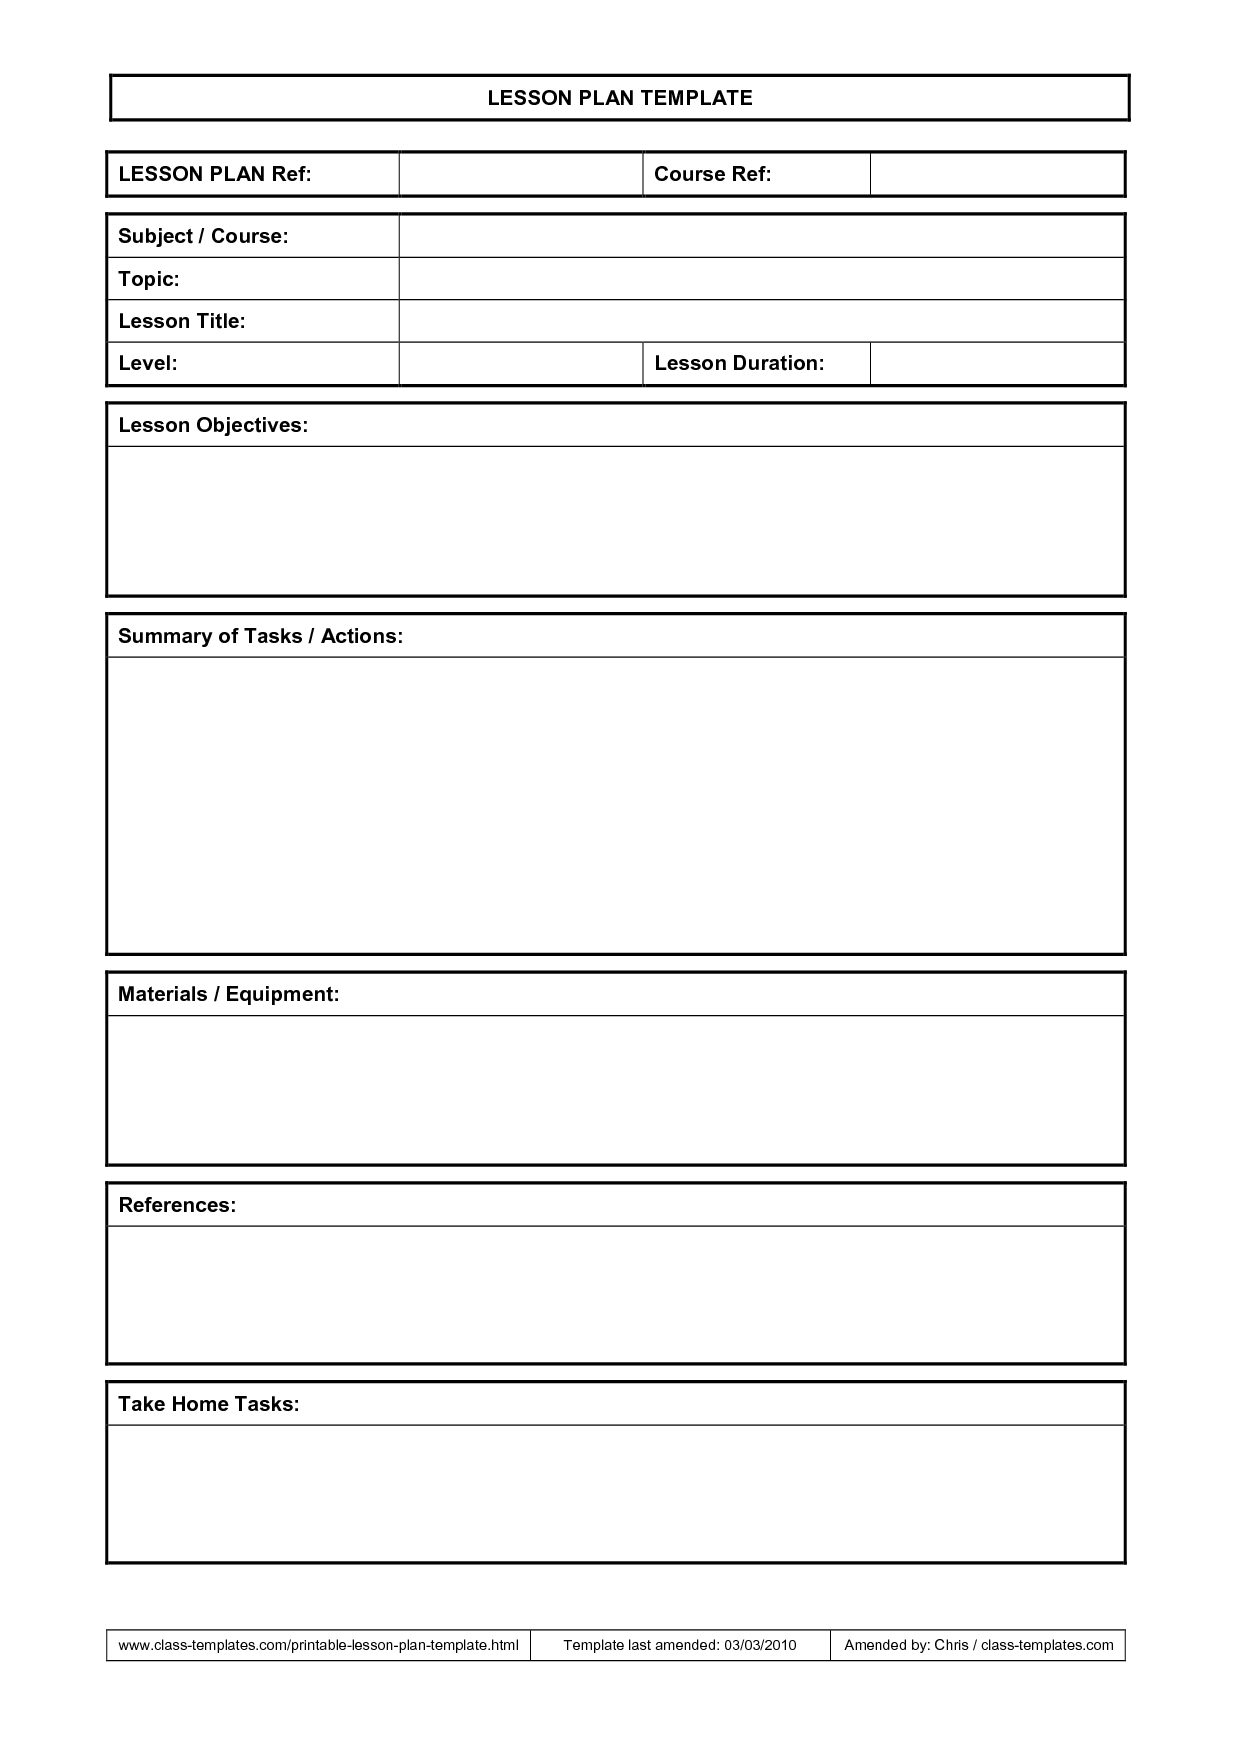 Lesson Plan Template Fotolip Rich Image And Wallpaper